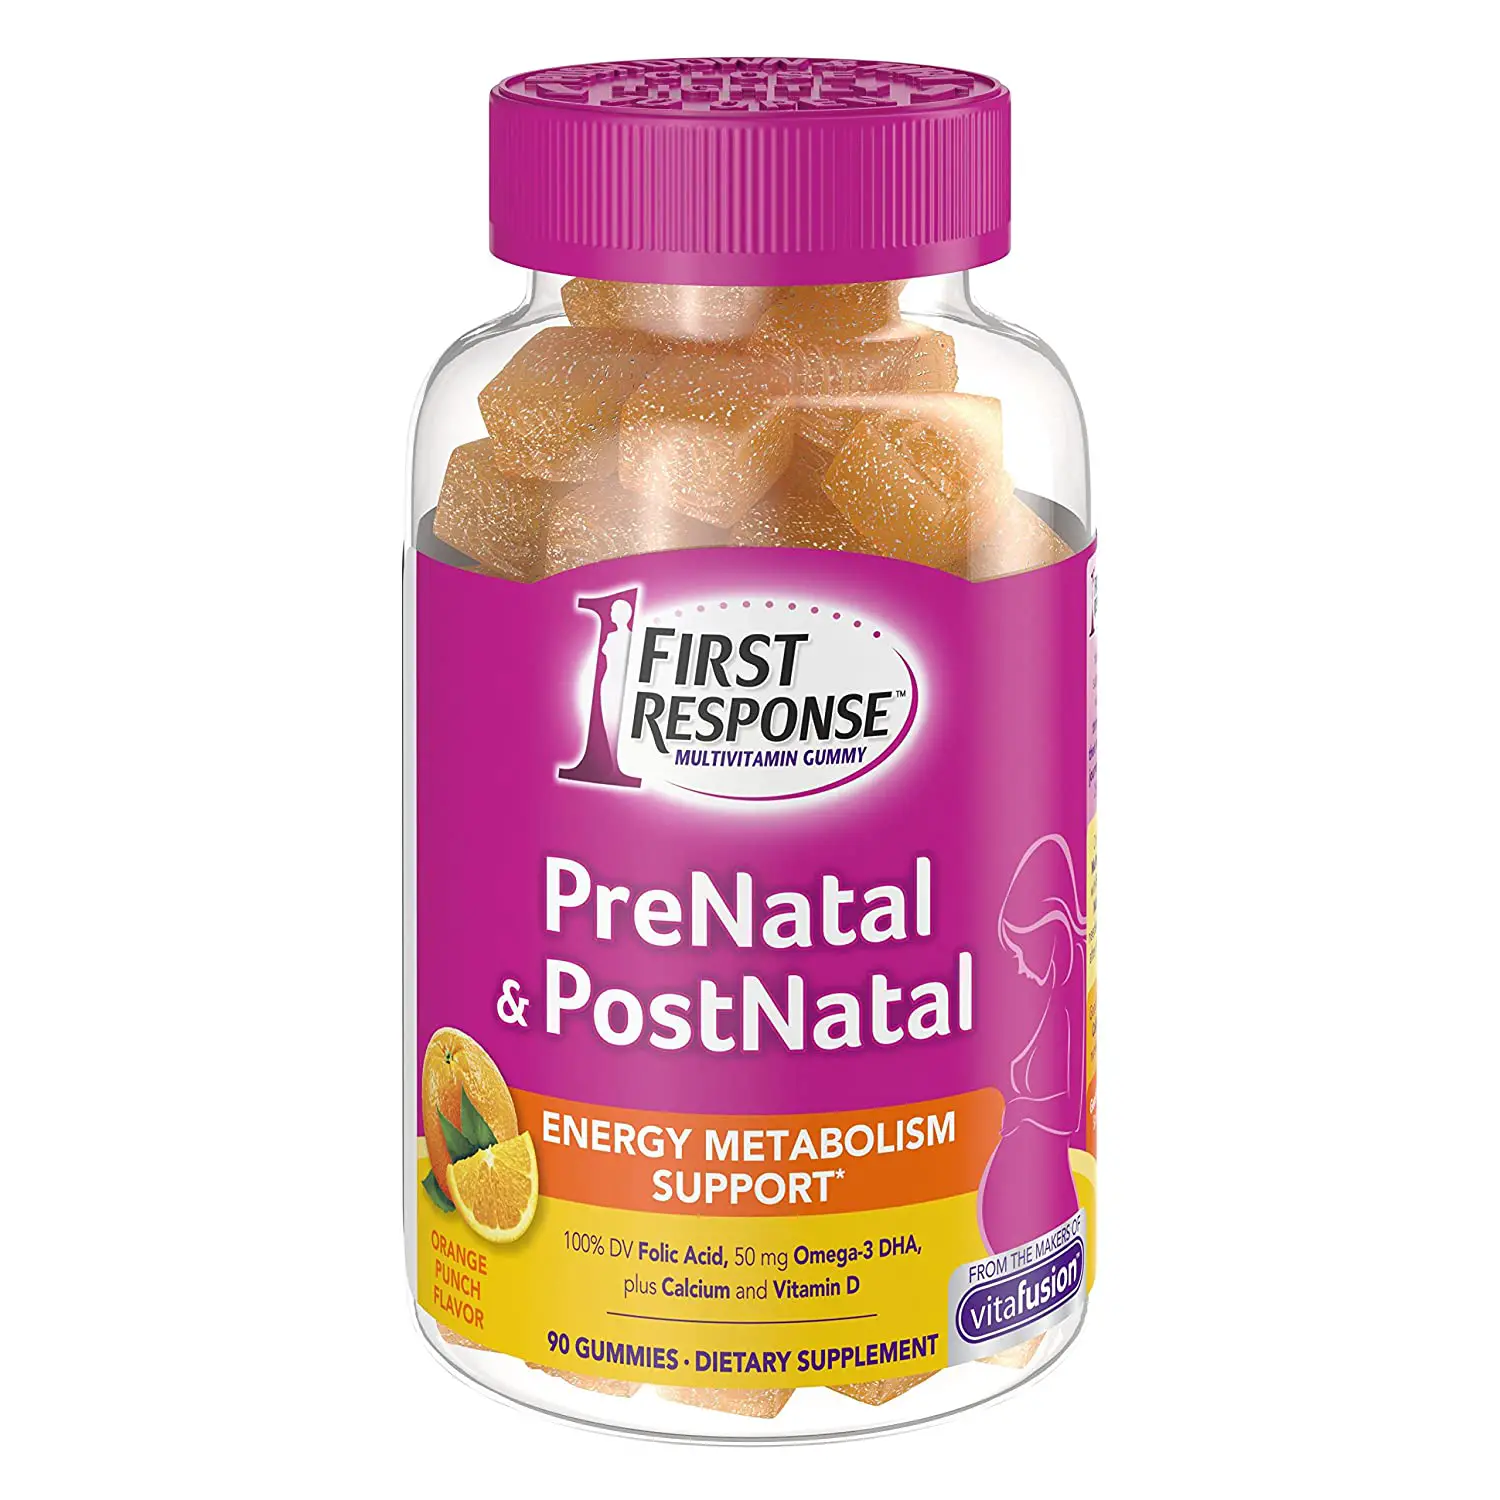 Top 9 Best Prenatal Vitamins With DHA For Pregnancy ...